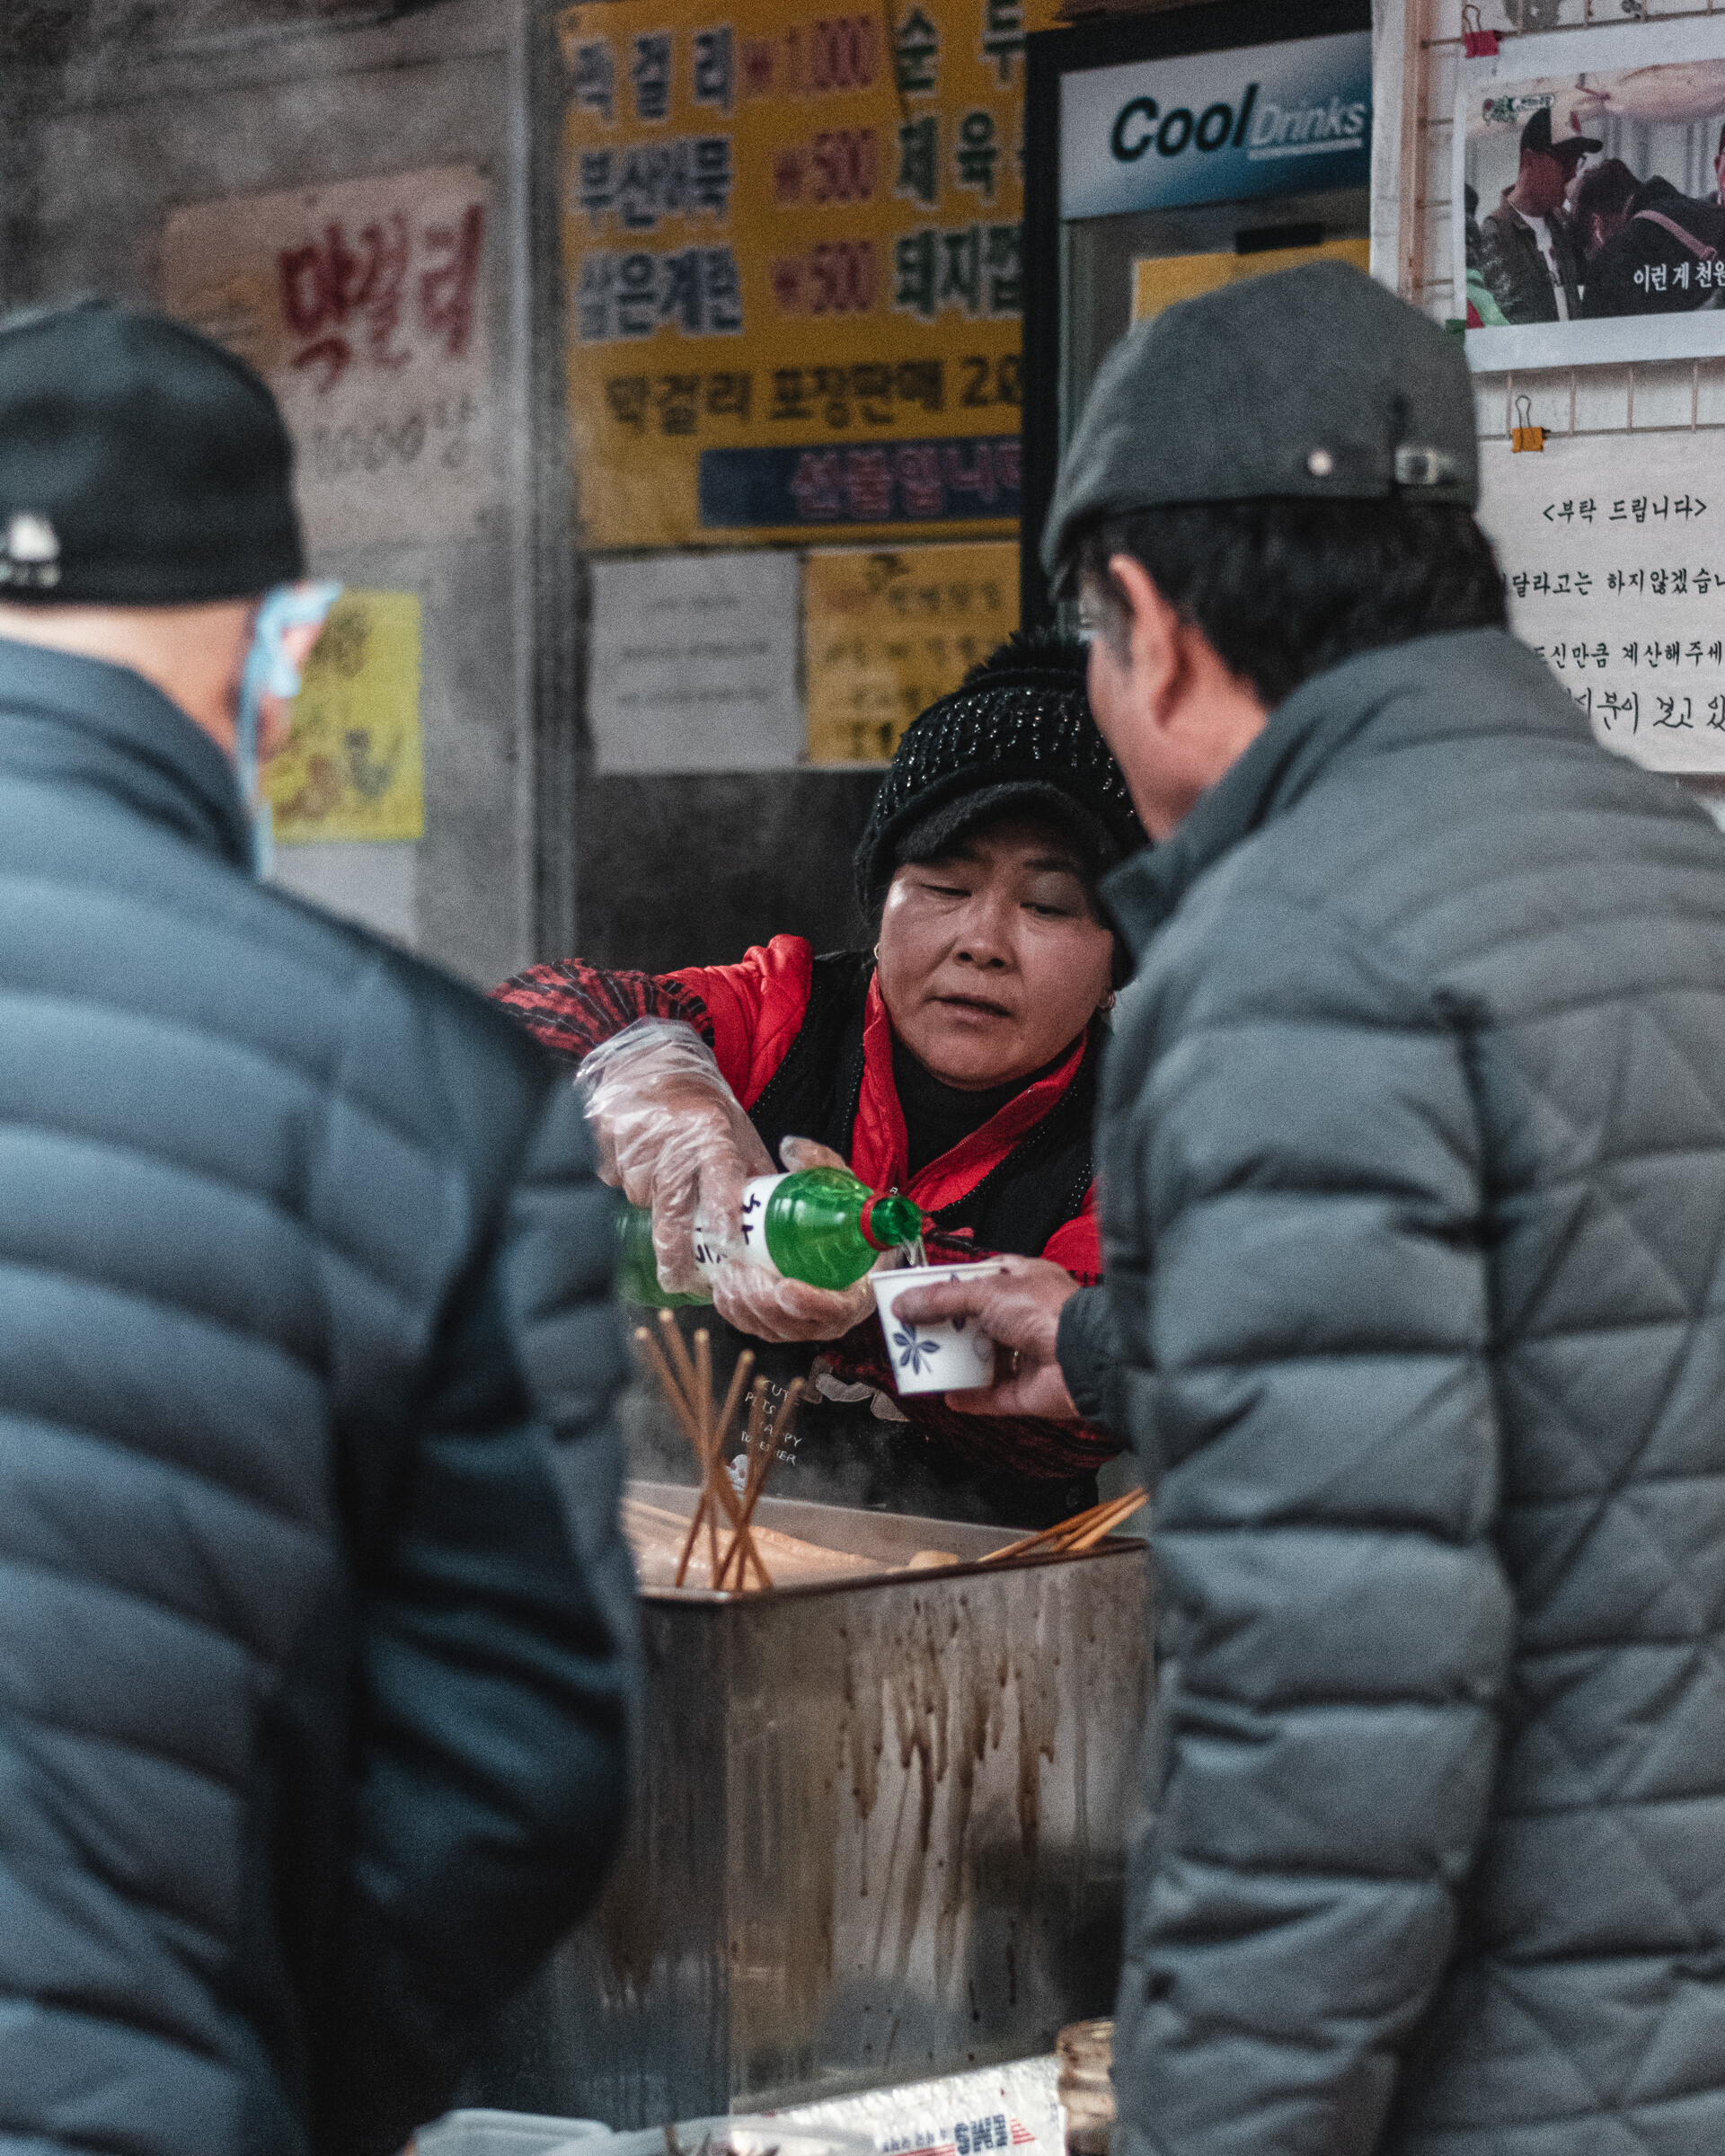 On a (very) cold day, some Soju heals your heart